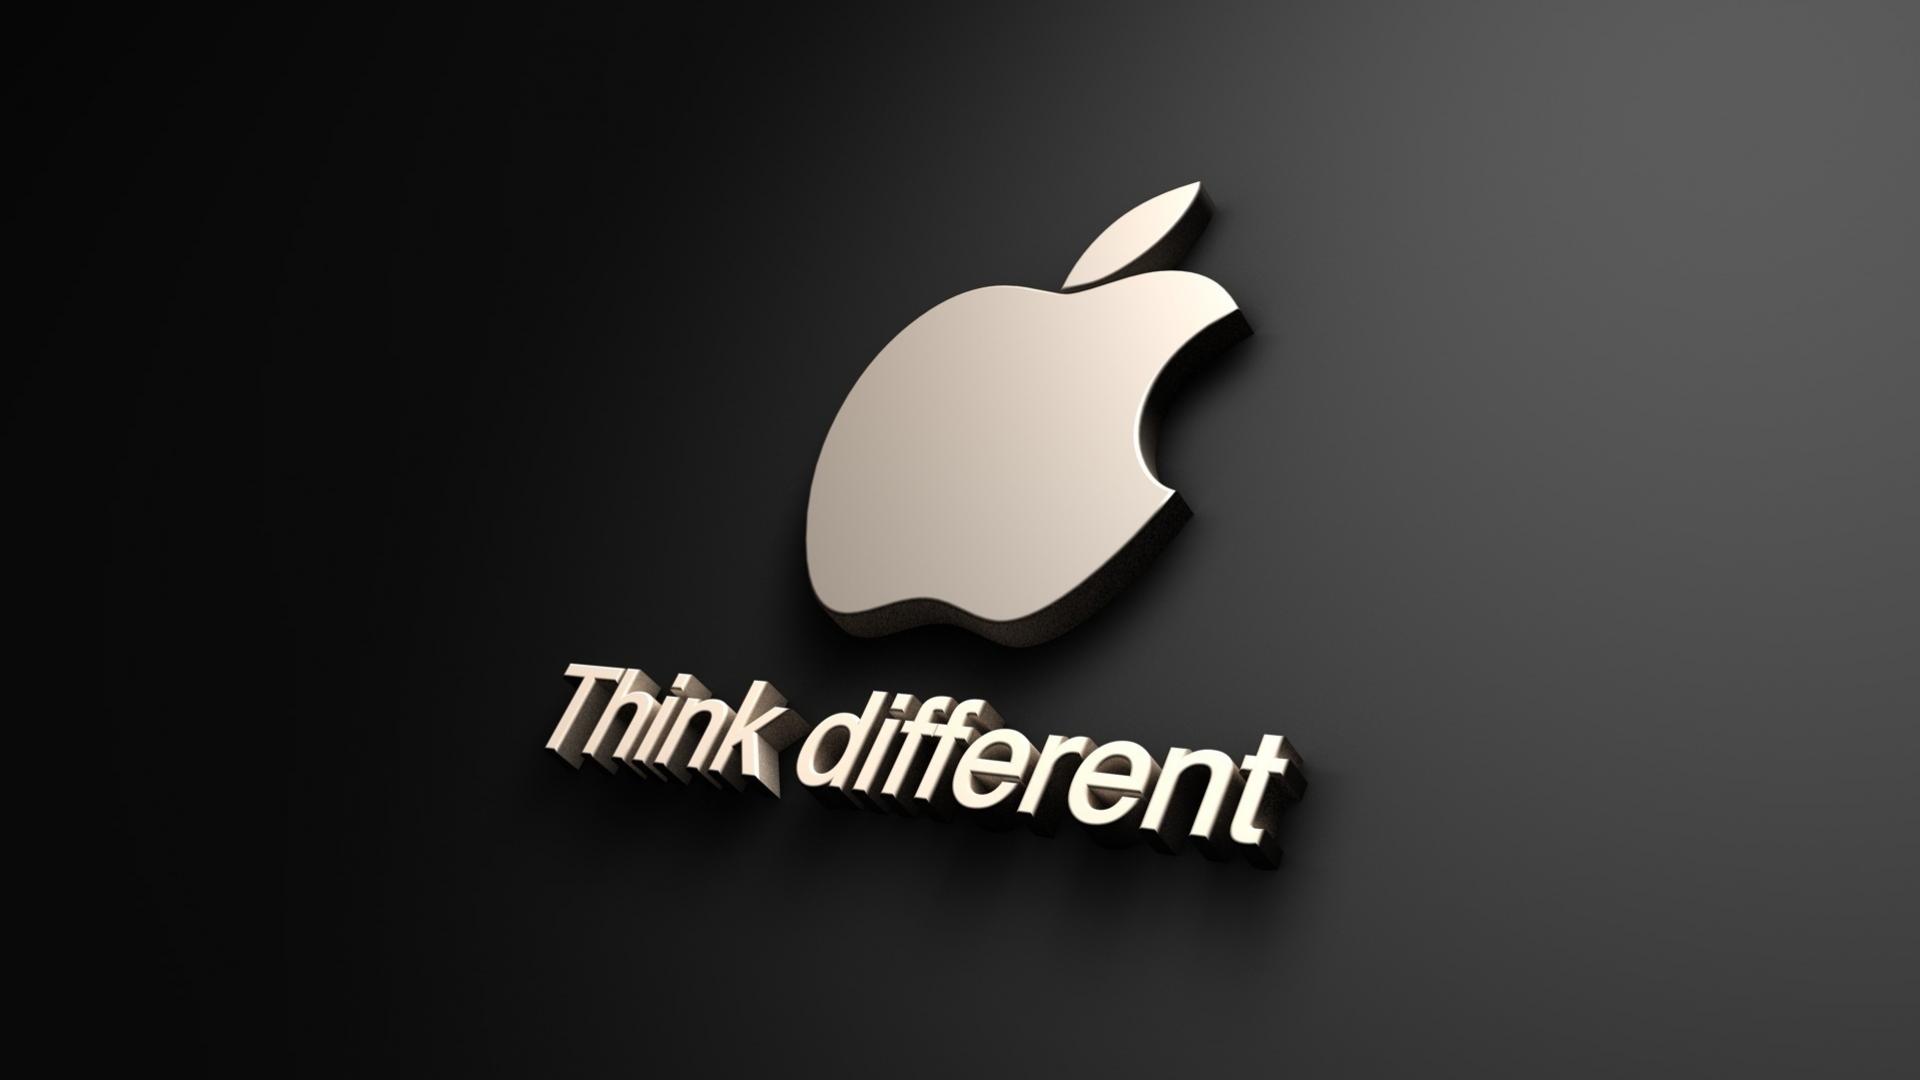 Apple Logo Wallpapers HD Wallpapers, Backgrounds, Images, Art